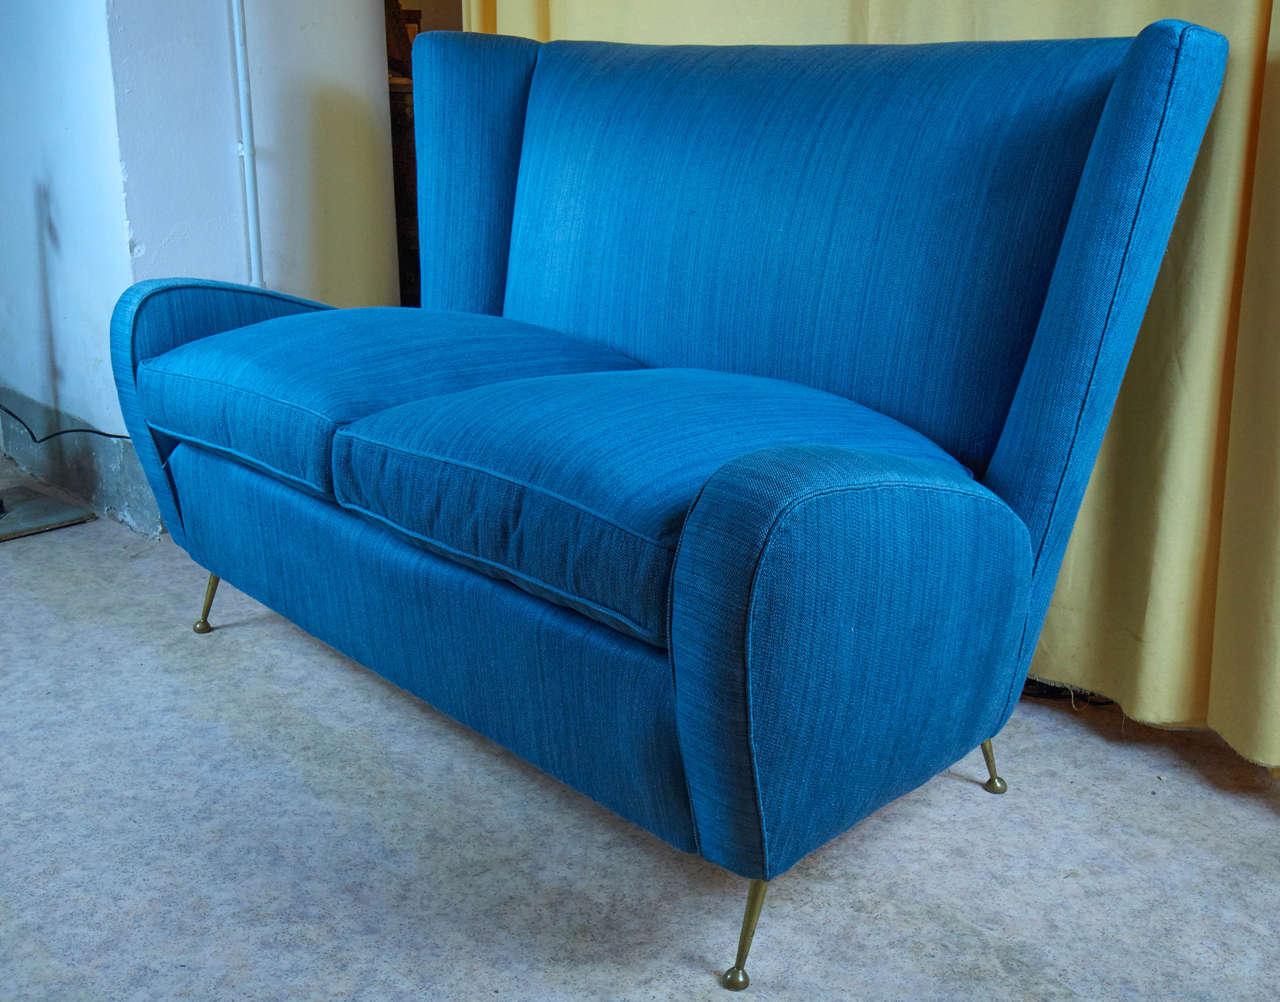 Interesting shaped 1950s sofa with four cast bronze thin legs.
 Upholstered original cotton bleu fabric.